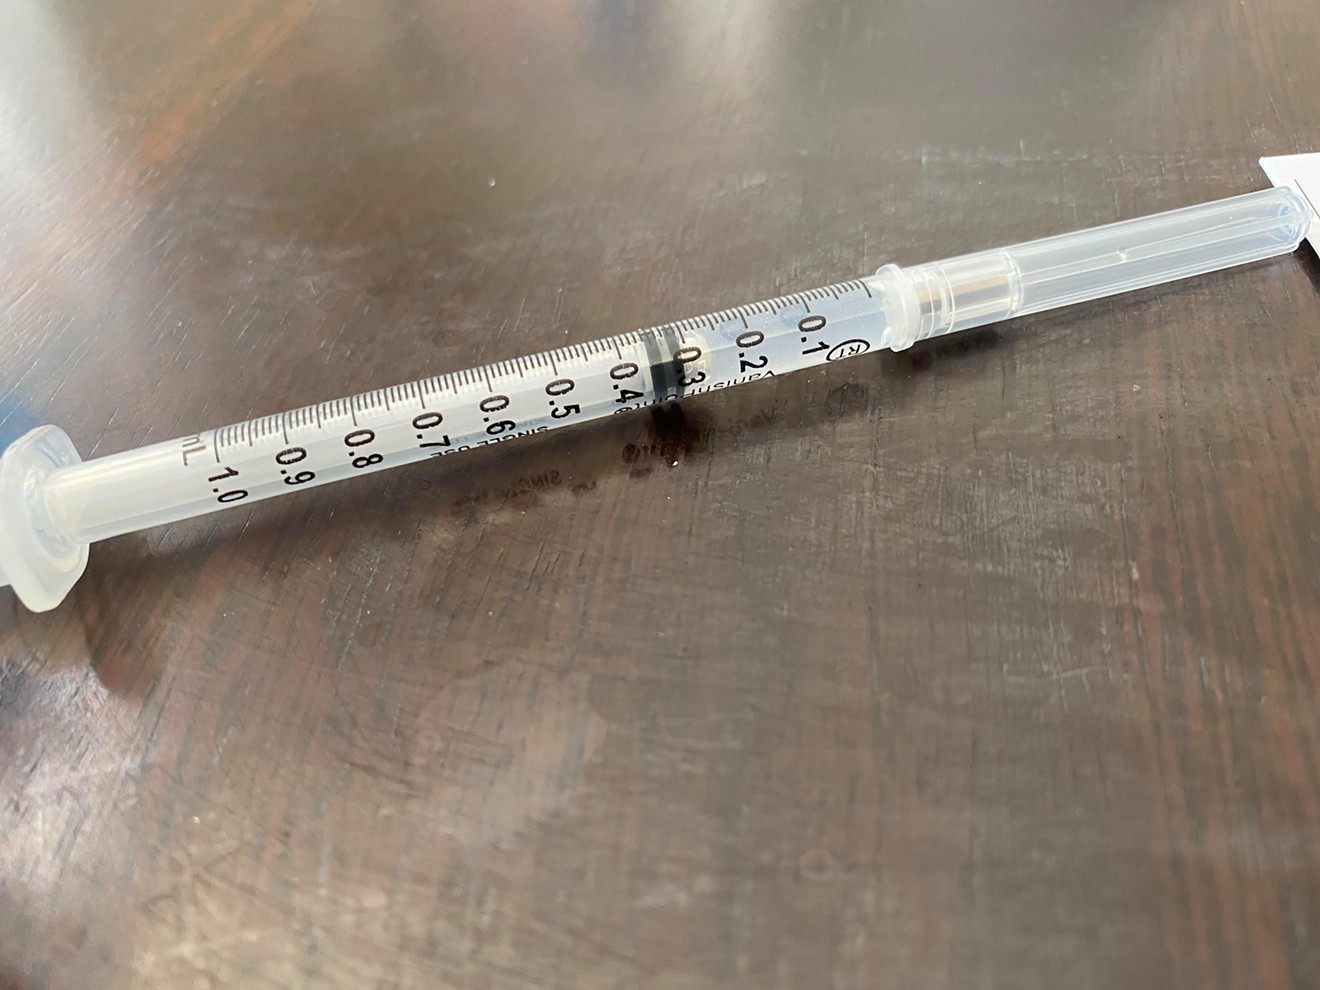 A COVID-19 vaccination shot recently administered at a longterm care facility.